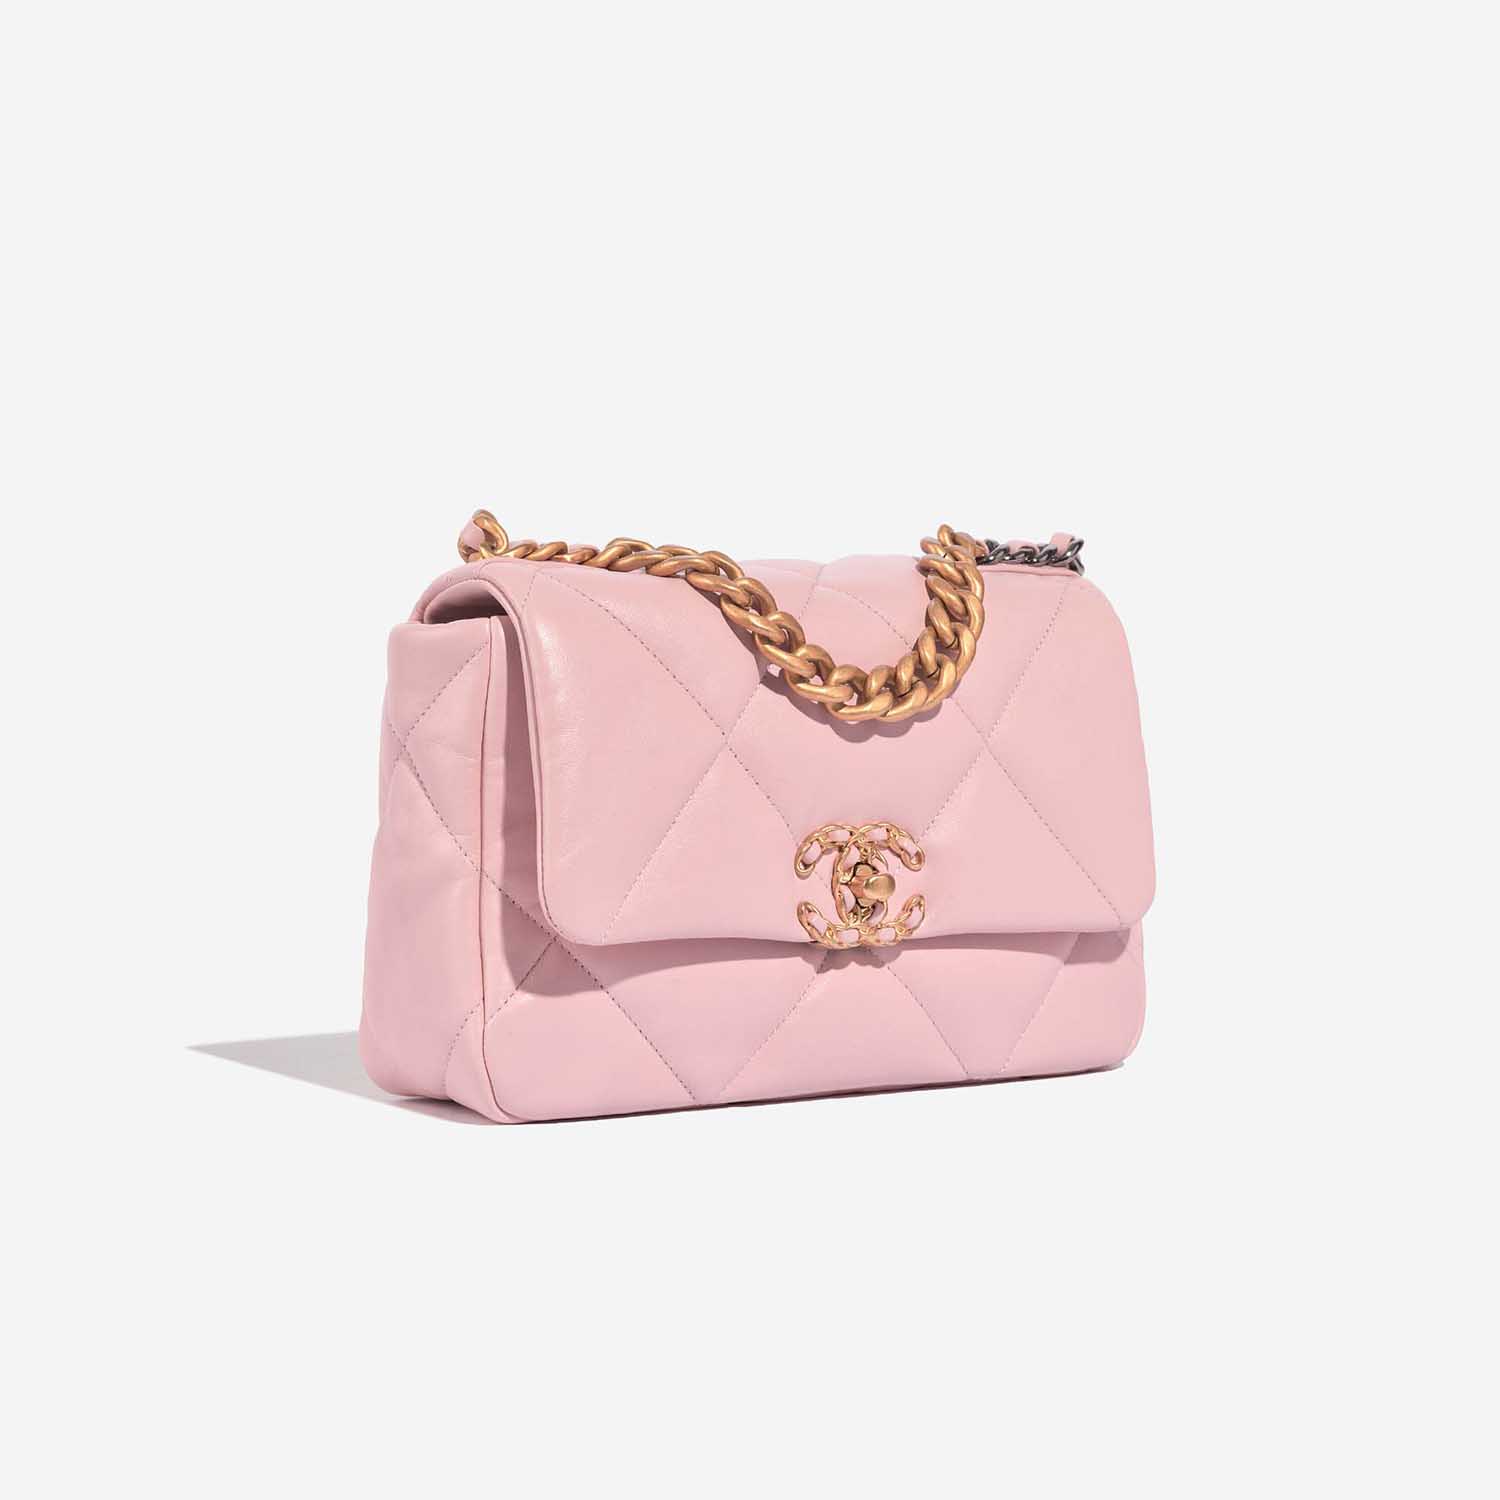 Chanel 19 Wallet On Chain Lamb Light Rose